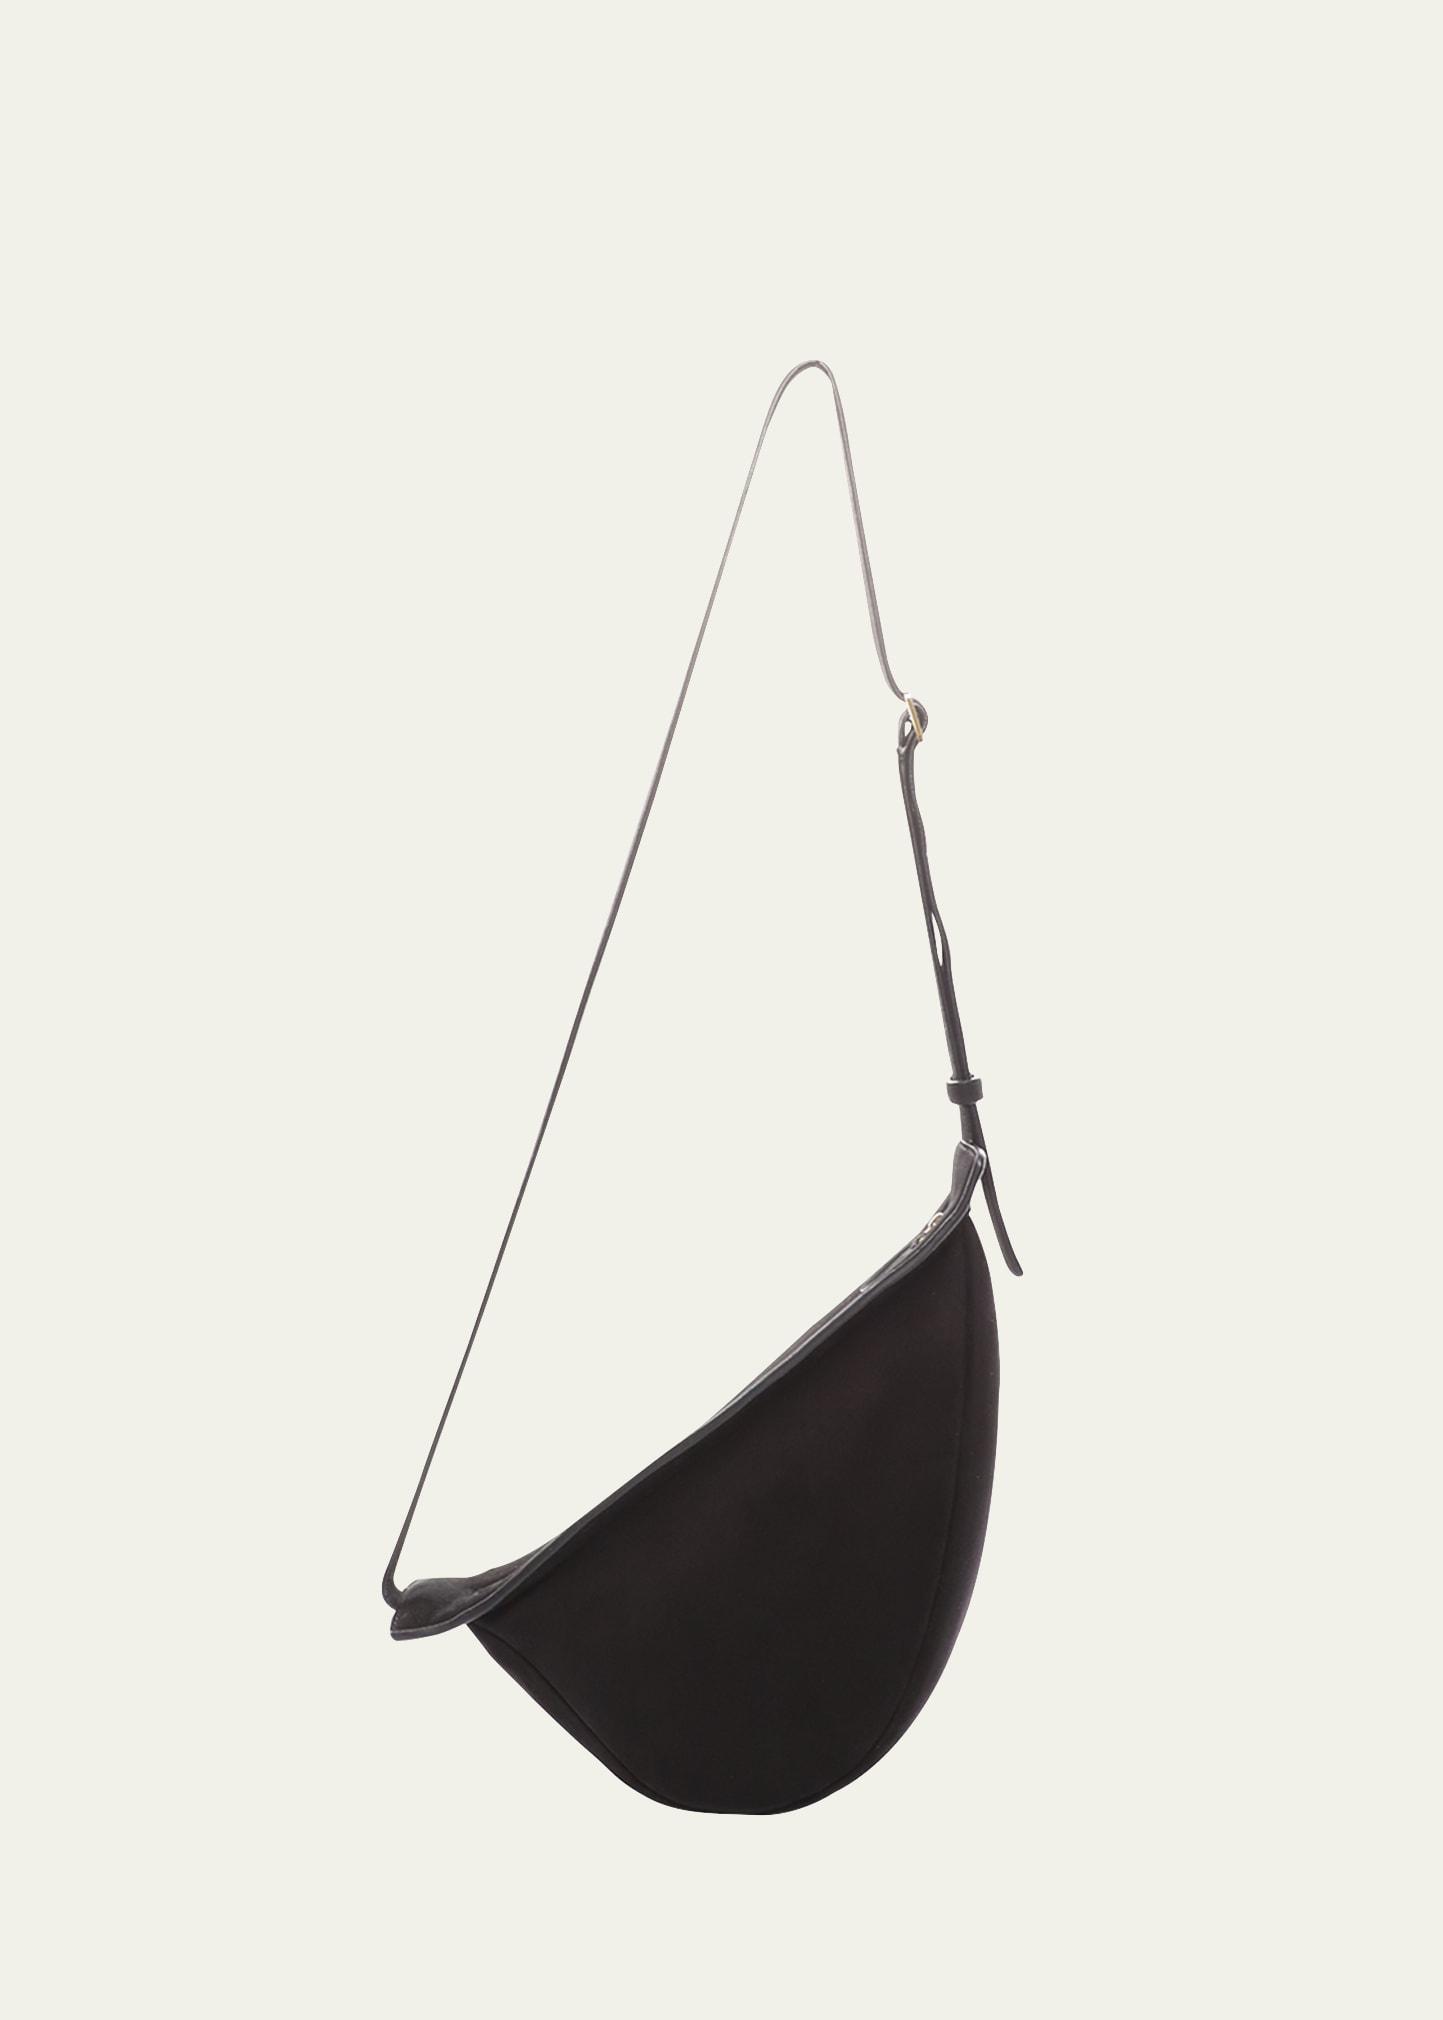 The Row - Small Slouchy Banana Bag in Suede - Black - One Size